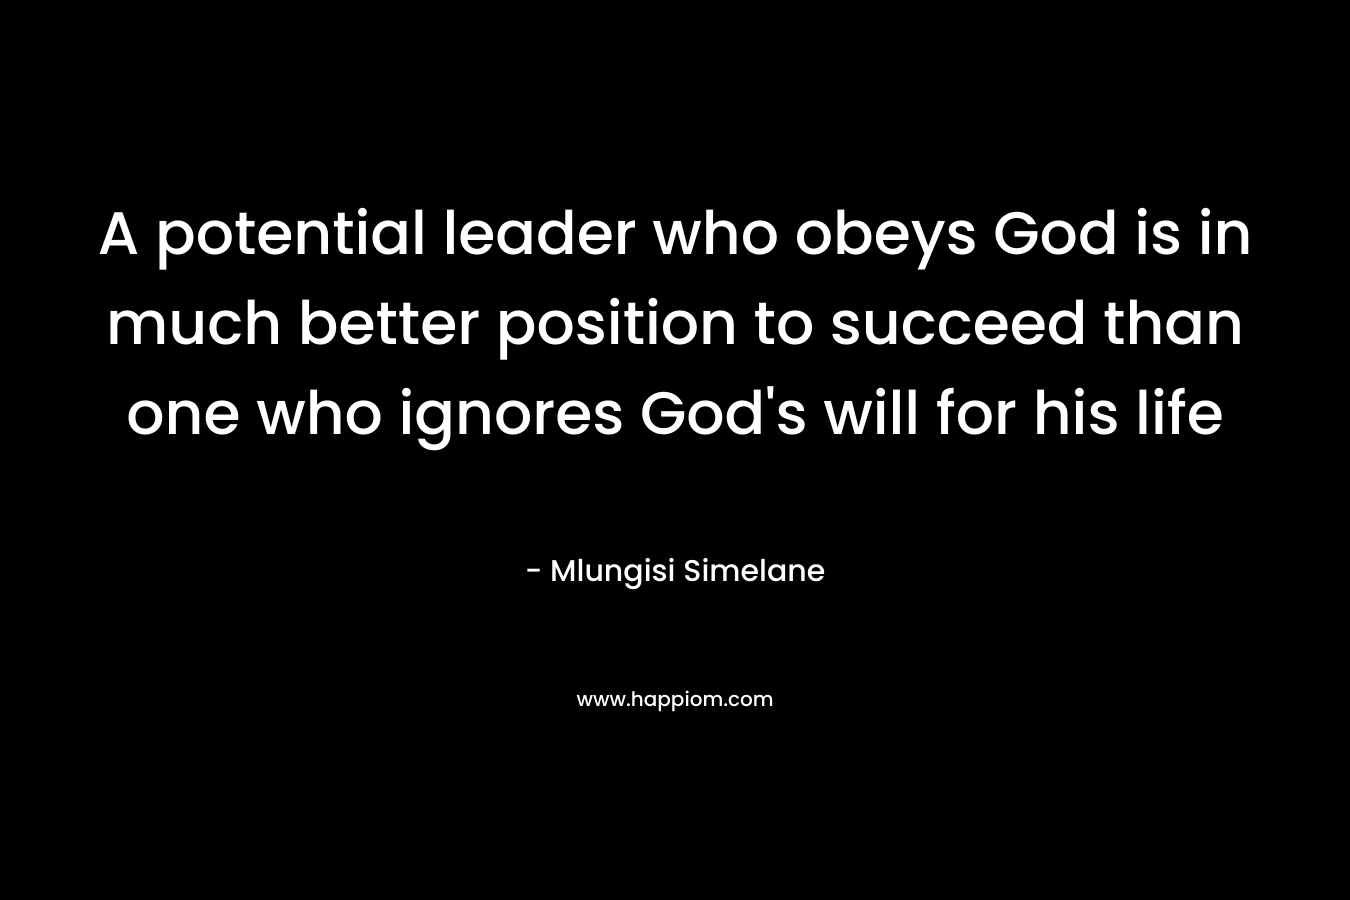 A potential leader who obeys God is in much better position to succeed than one who ignores God's will for his life